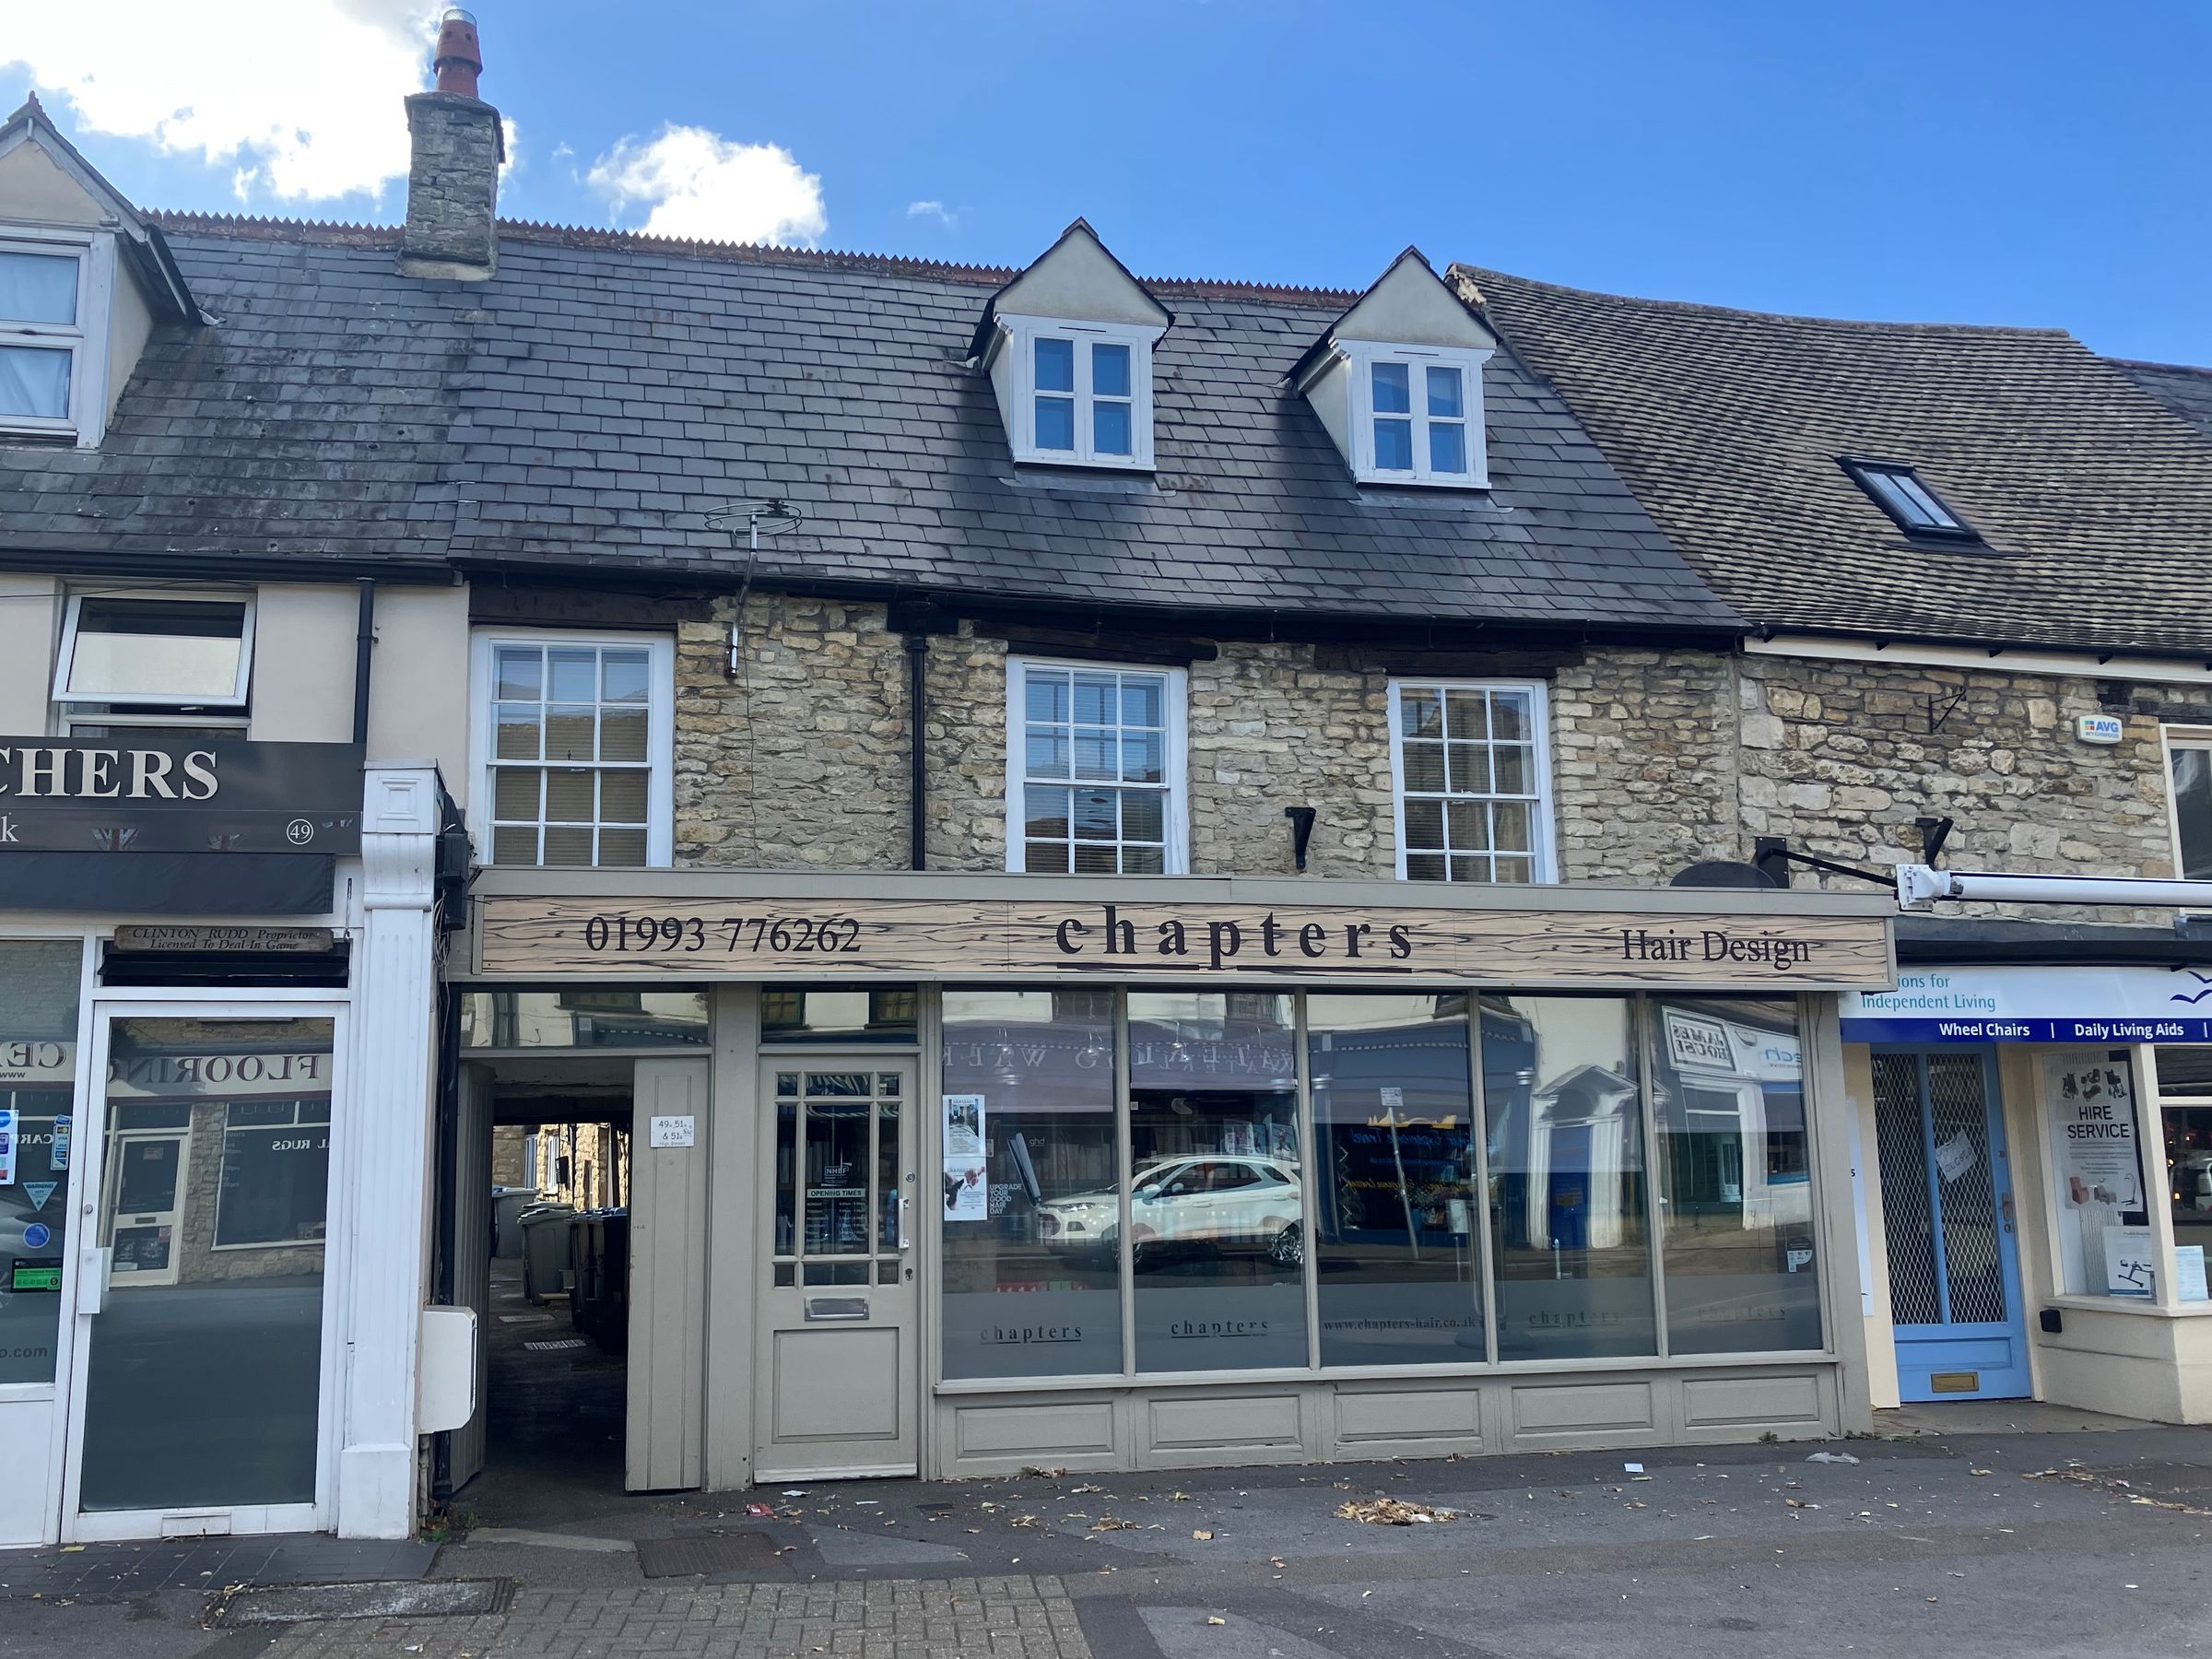 Retail premises for sale in High Street, Witney OX28 - Zoopla